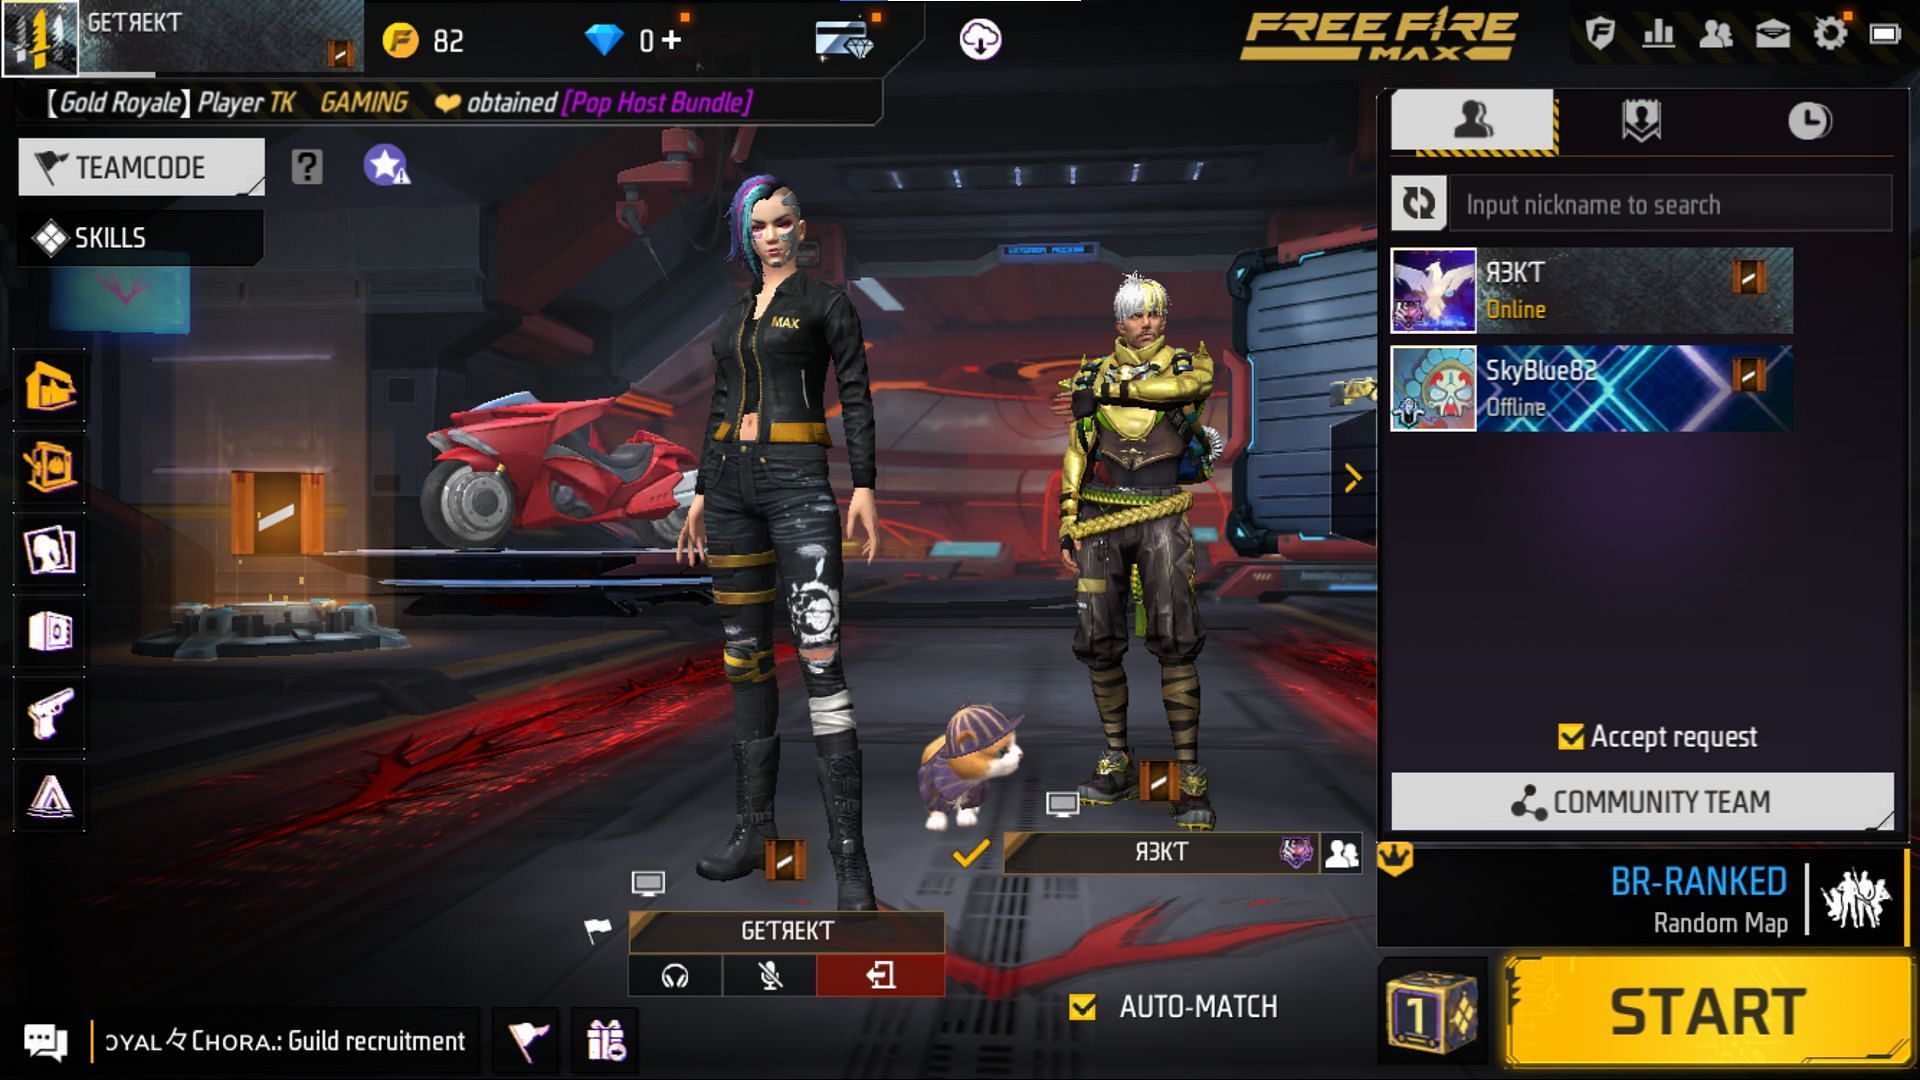 It is better to queue with friends in Free Fire (Image via Garena)